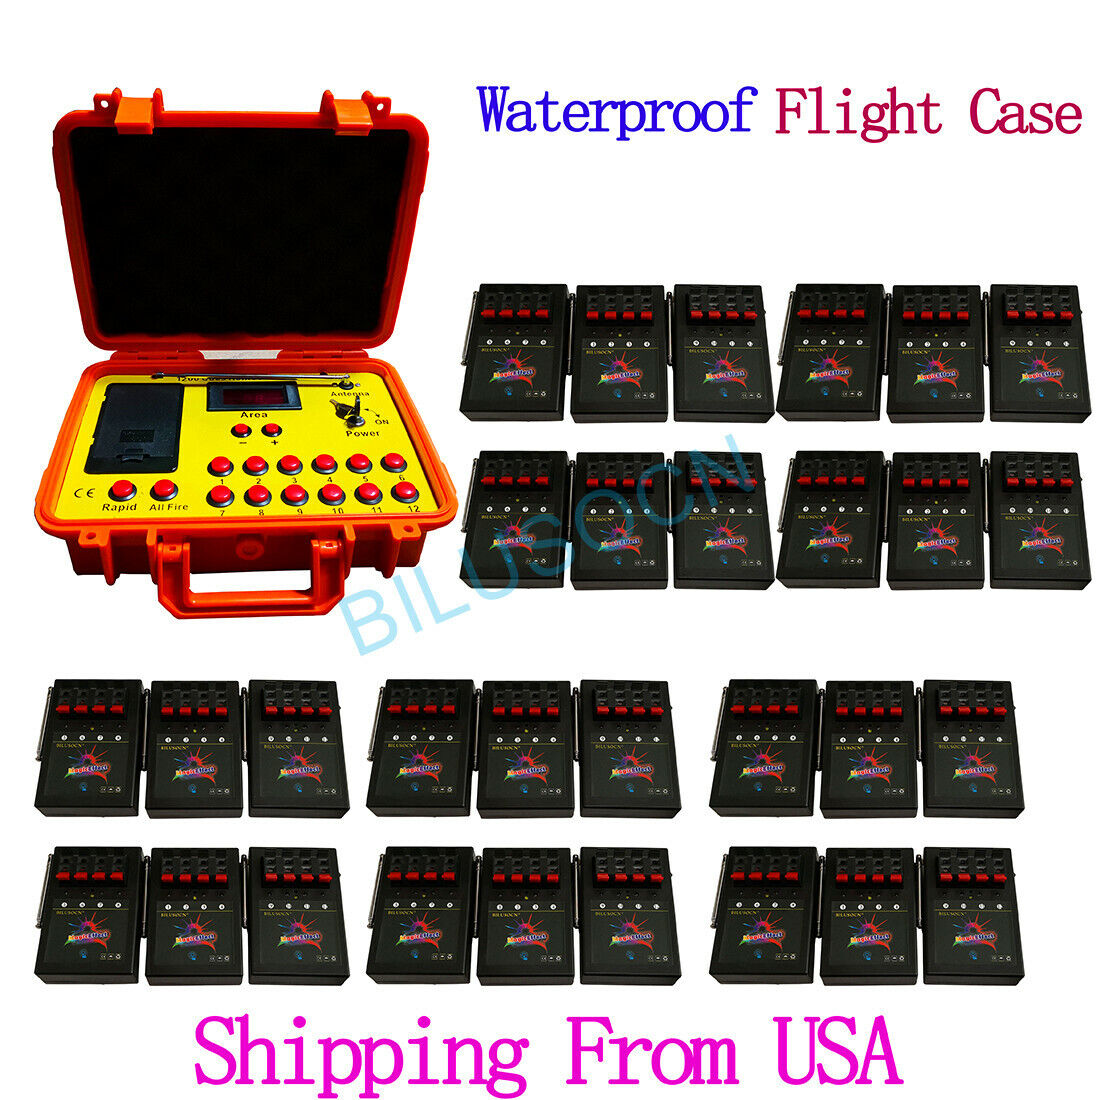 NEW Ship From USA 120 cue 500M distance wireless fireworks firing system control